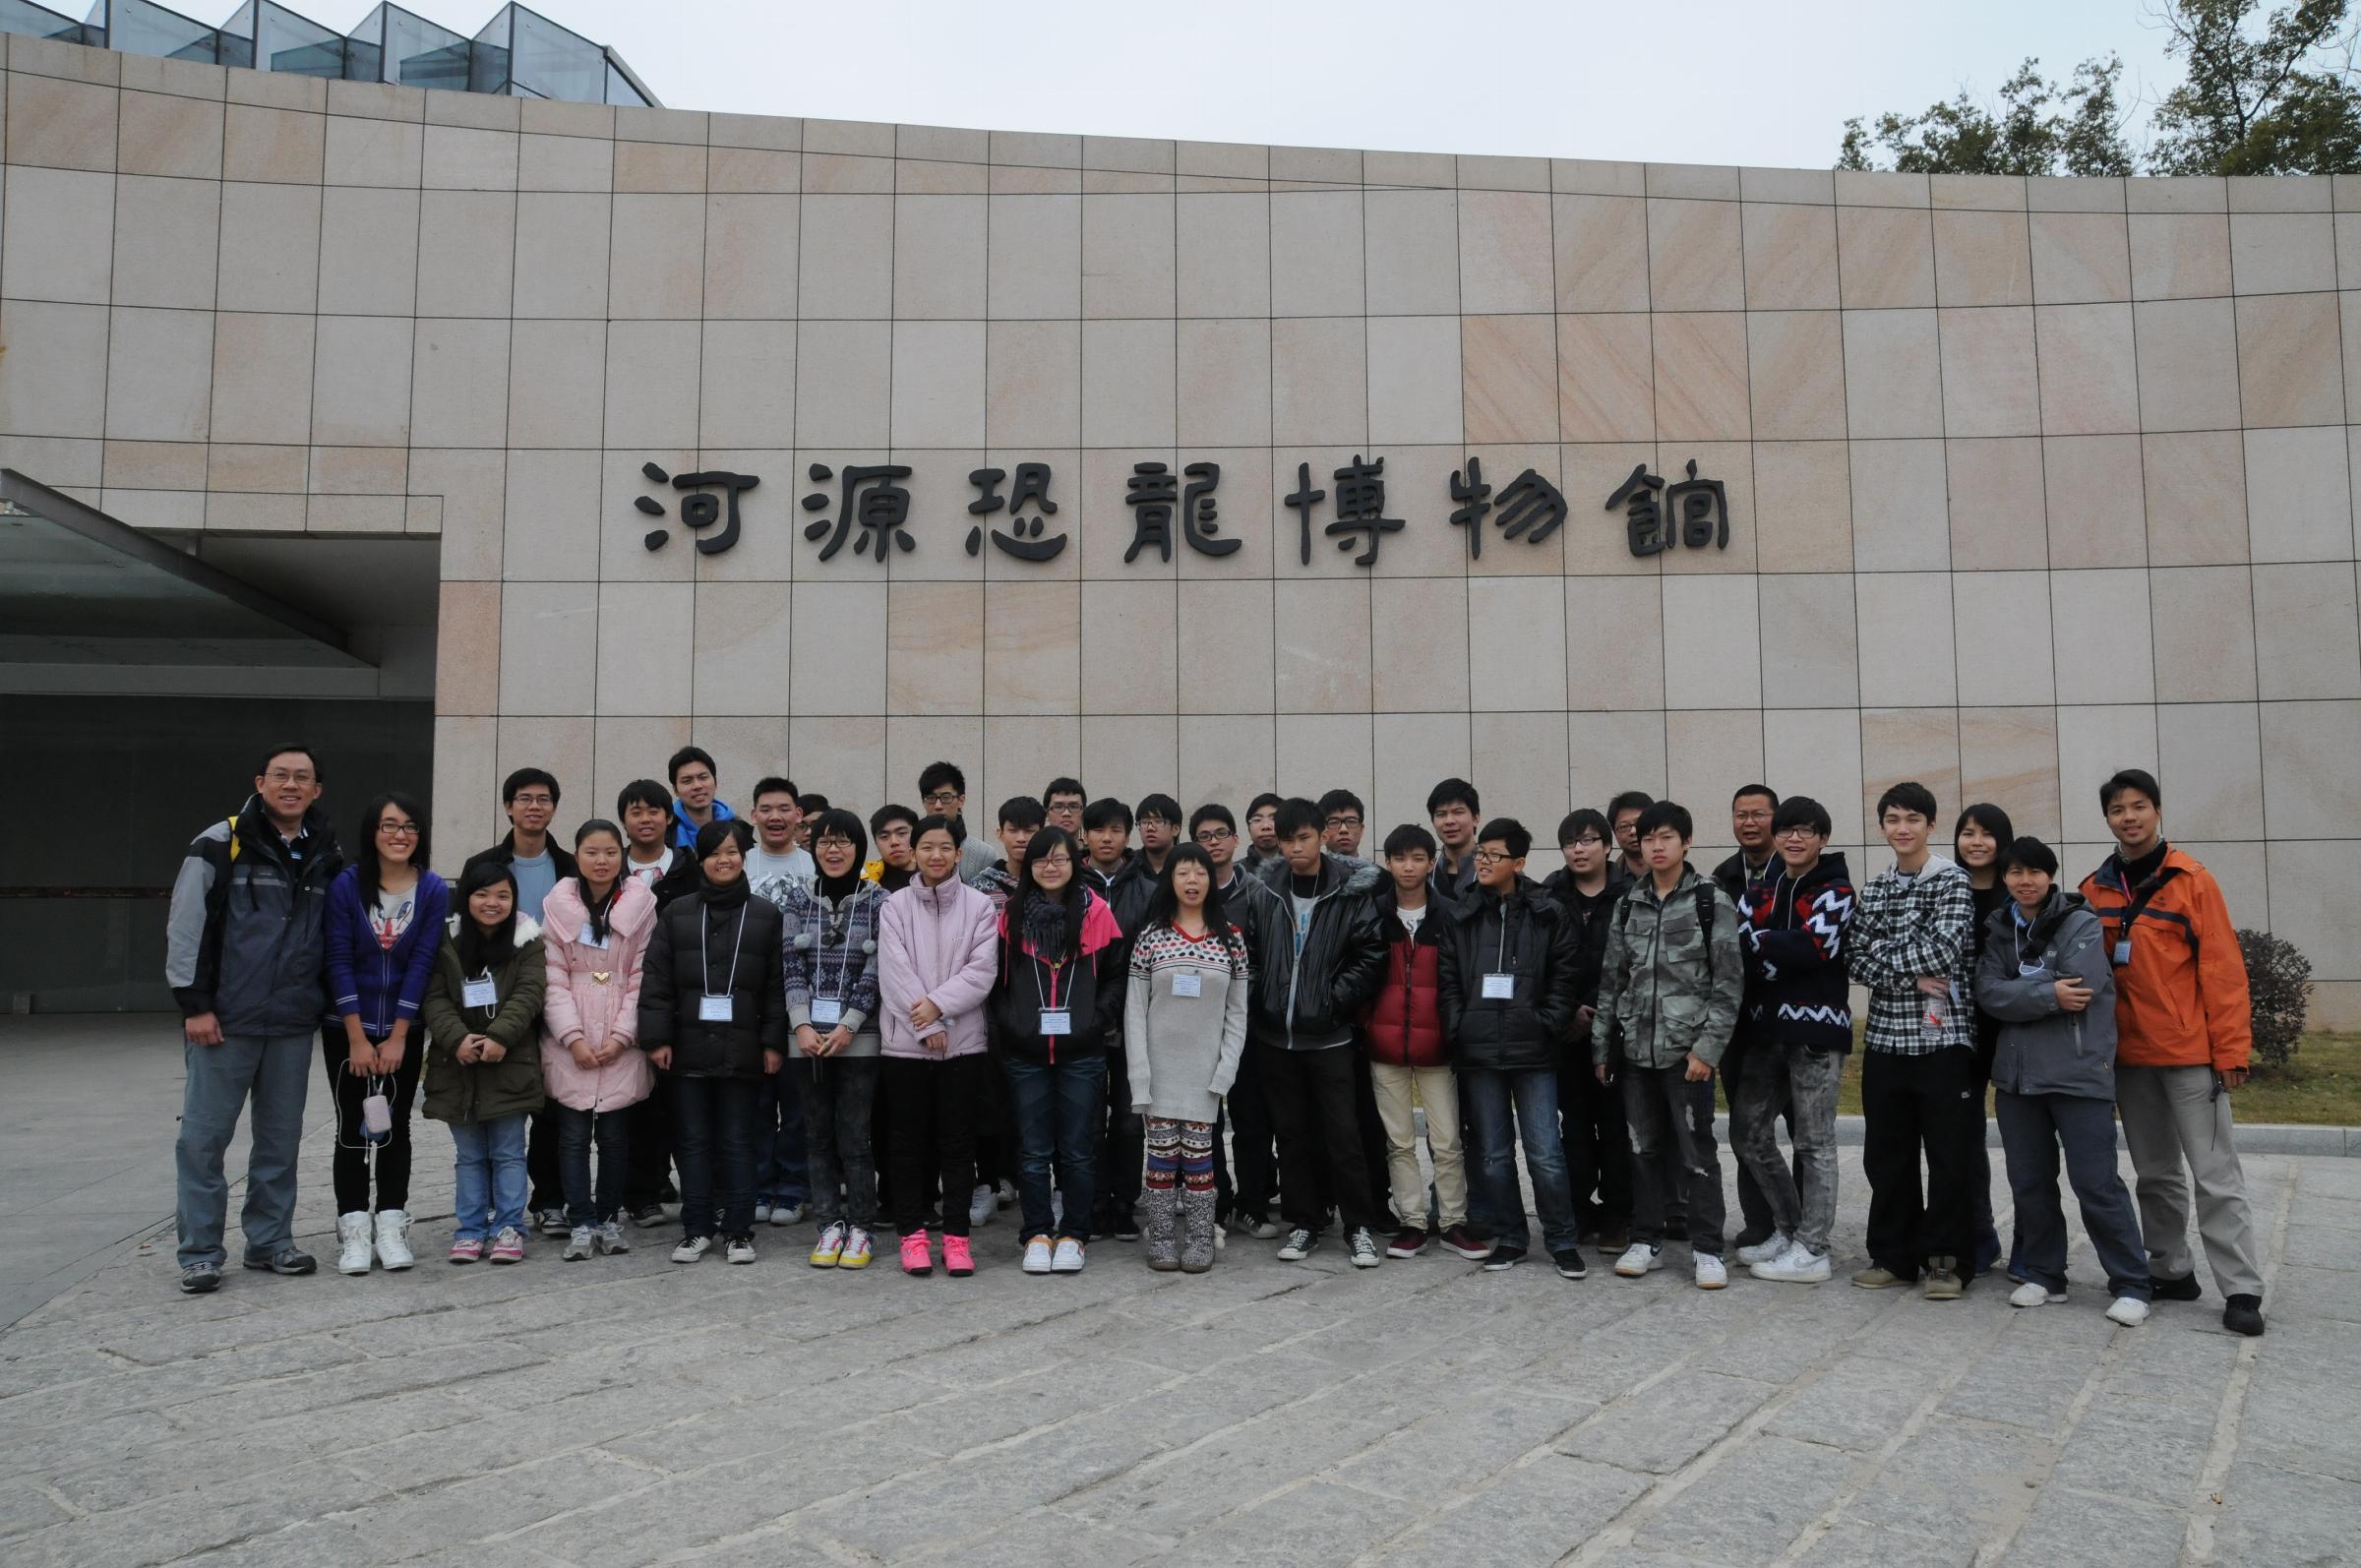 Sik Sik Yuen Joint School Study visit on Astronomy and Hakka Culture